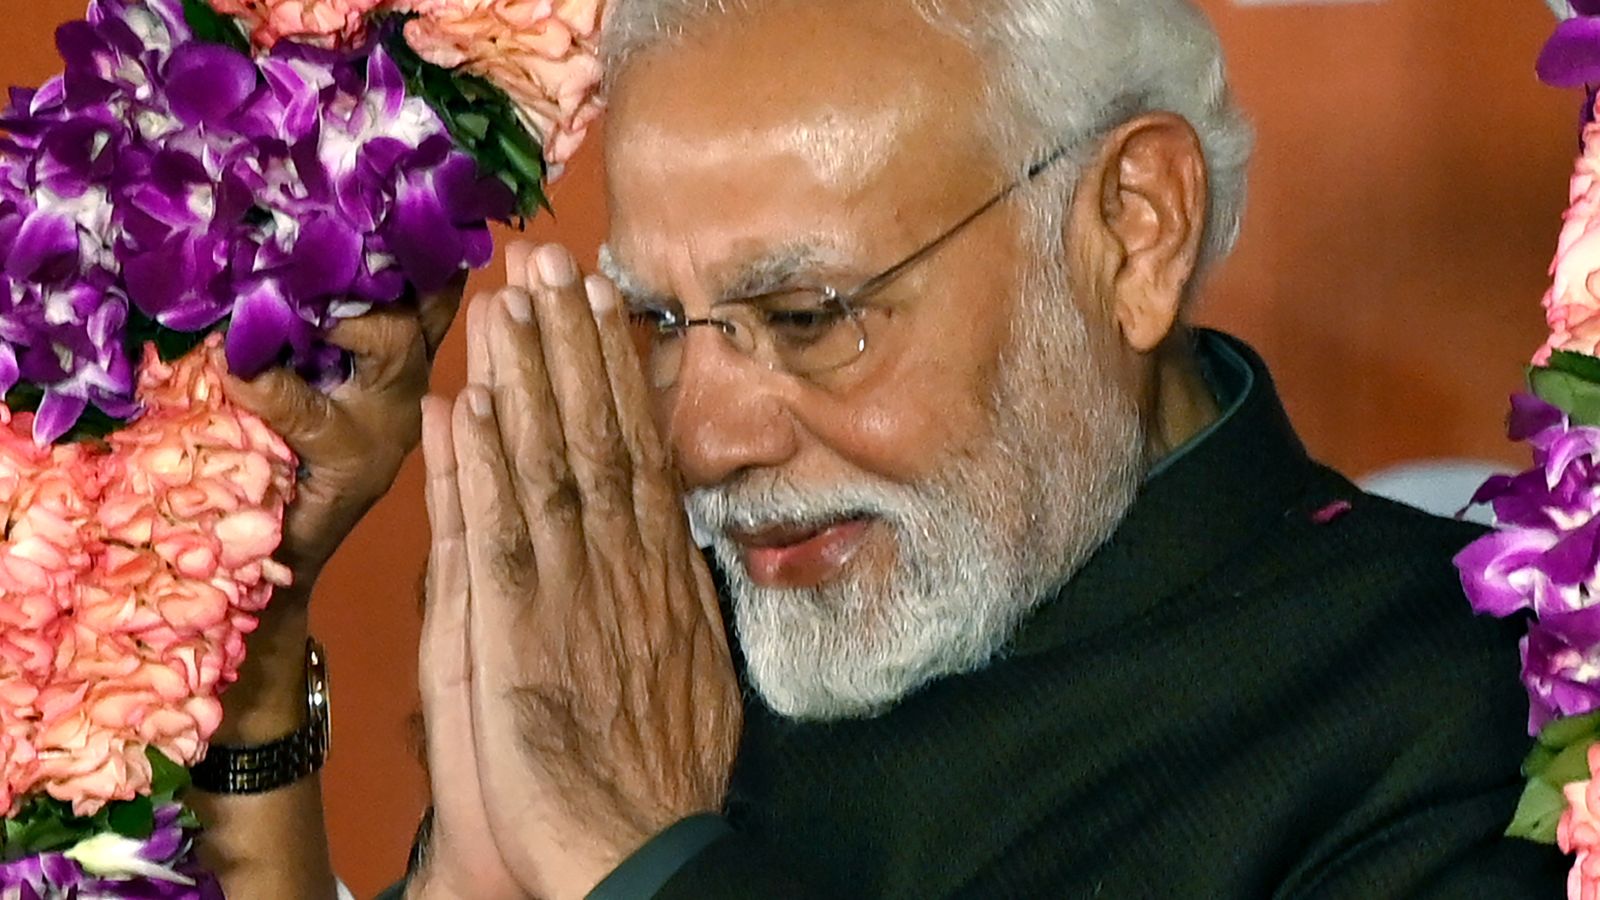 India elections: The Modi juggernaut rolls on - how his Bharatiya Janata Party is dominating in state and national polls